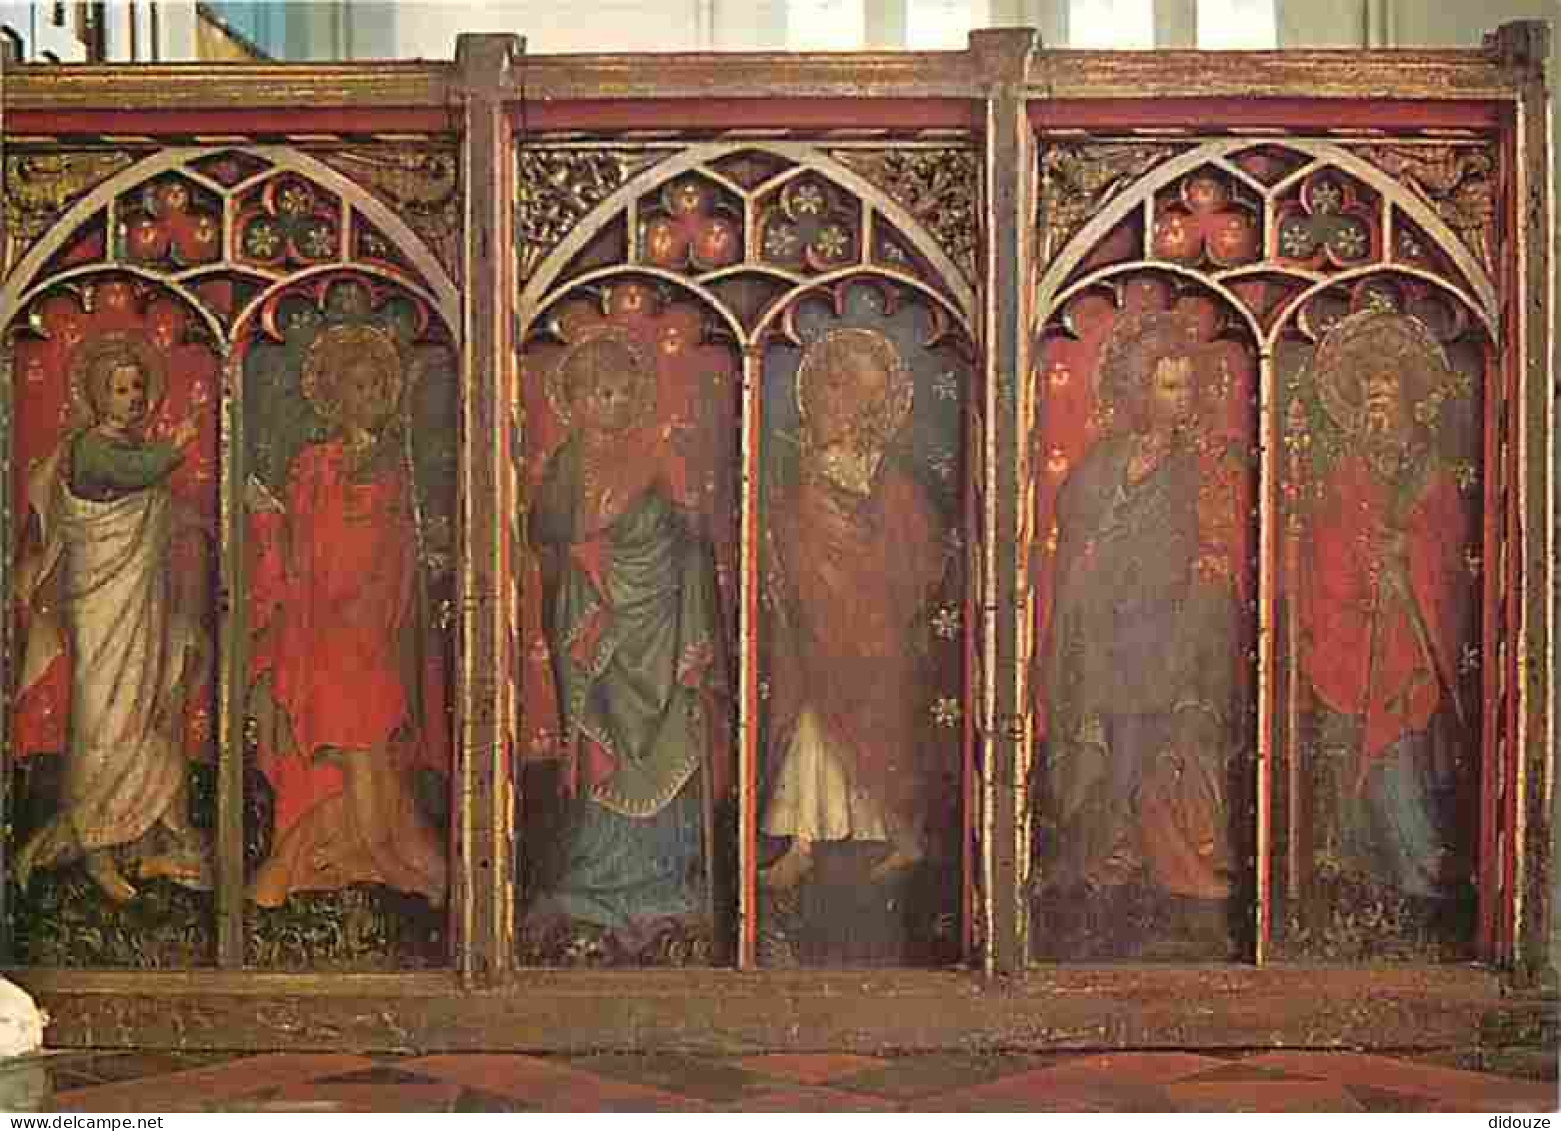 Art - Peinture Religieuse - From The Rood-screen Of The Church Of St James The Great - Castle Acre - Norfolk - CPM - Voi - Tableaux, Vitraux Et Statues